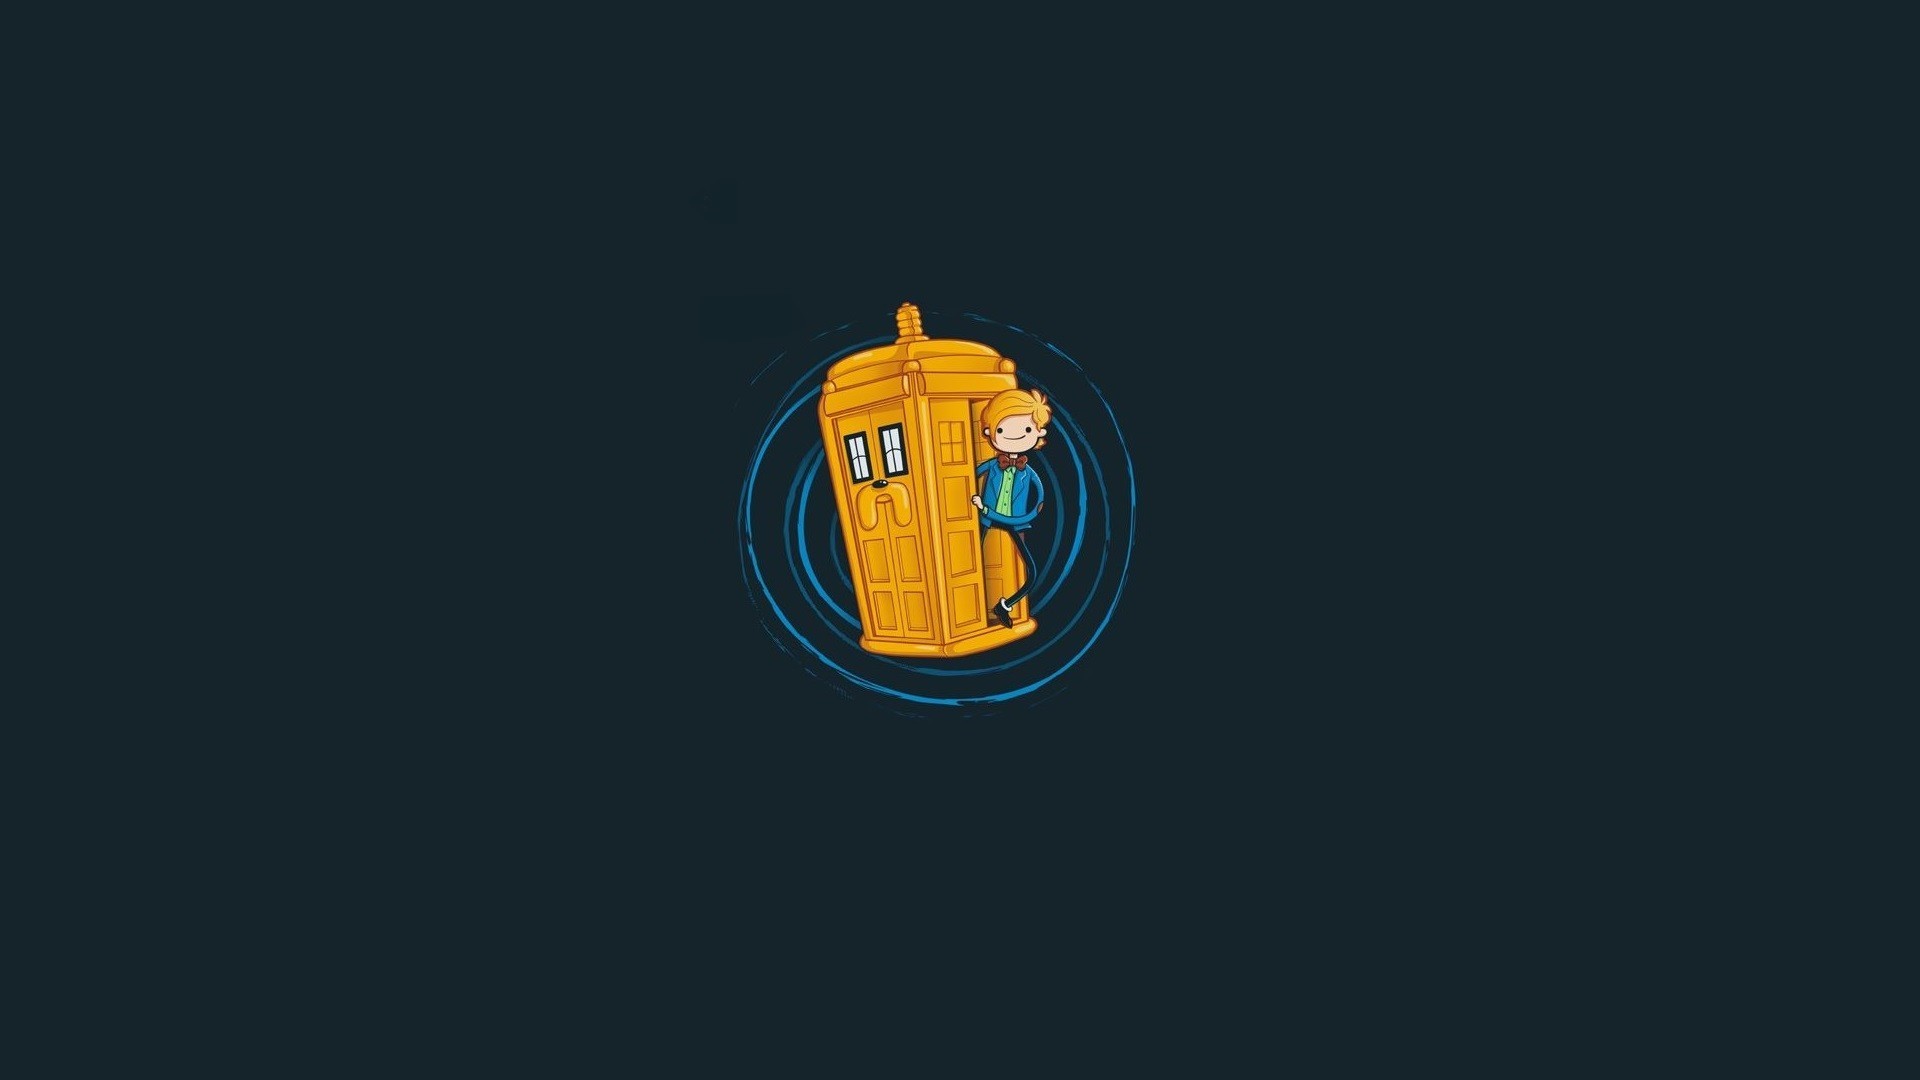 1920x1080 General  Doctor Who Finn the Human Jake the Dog Adventure Time  minimalism crossover